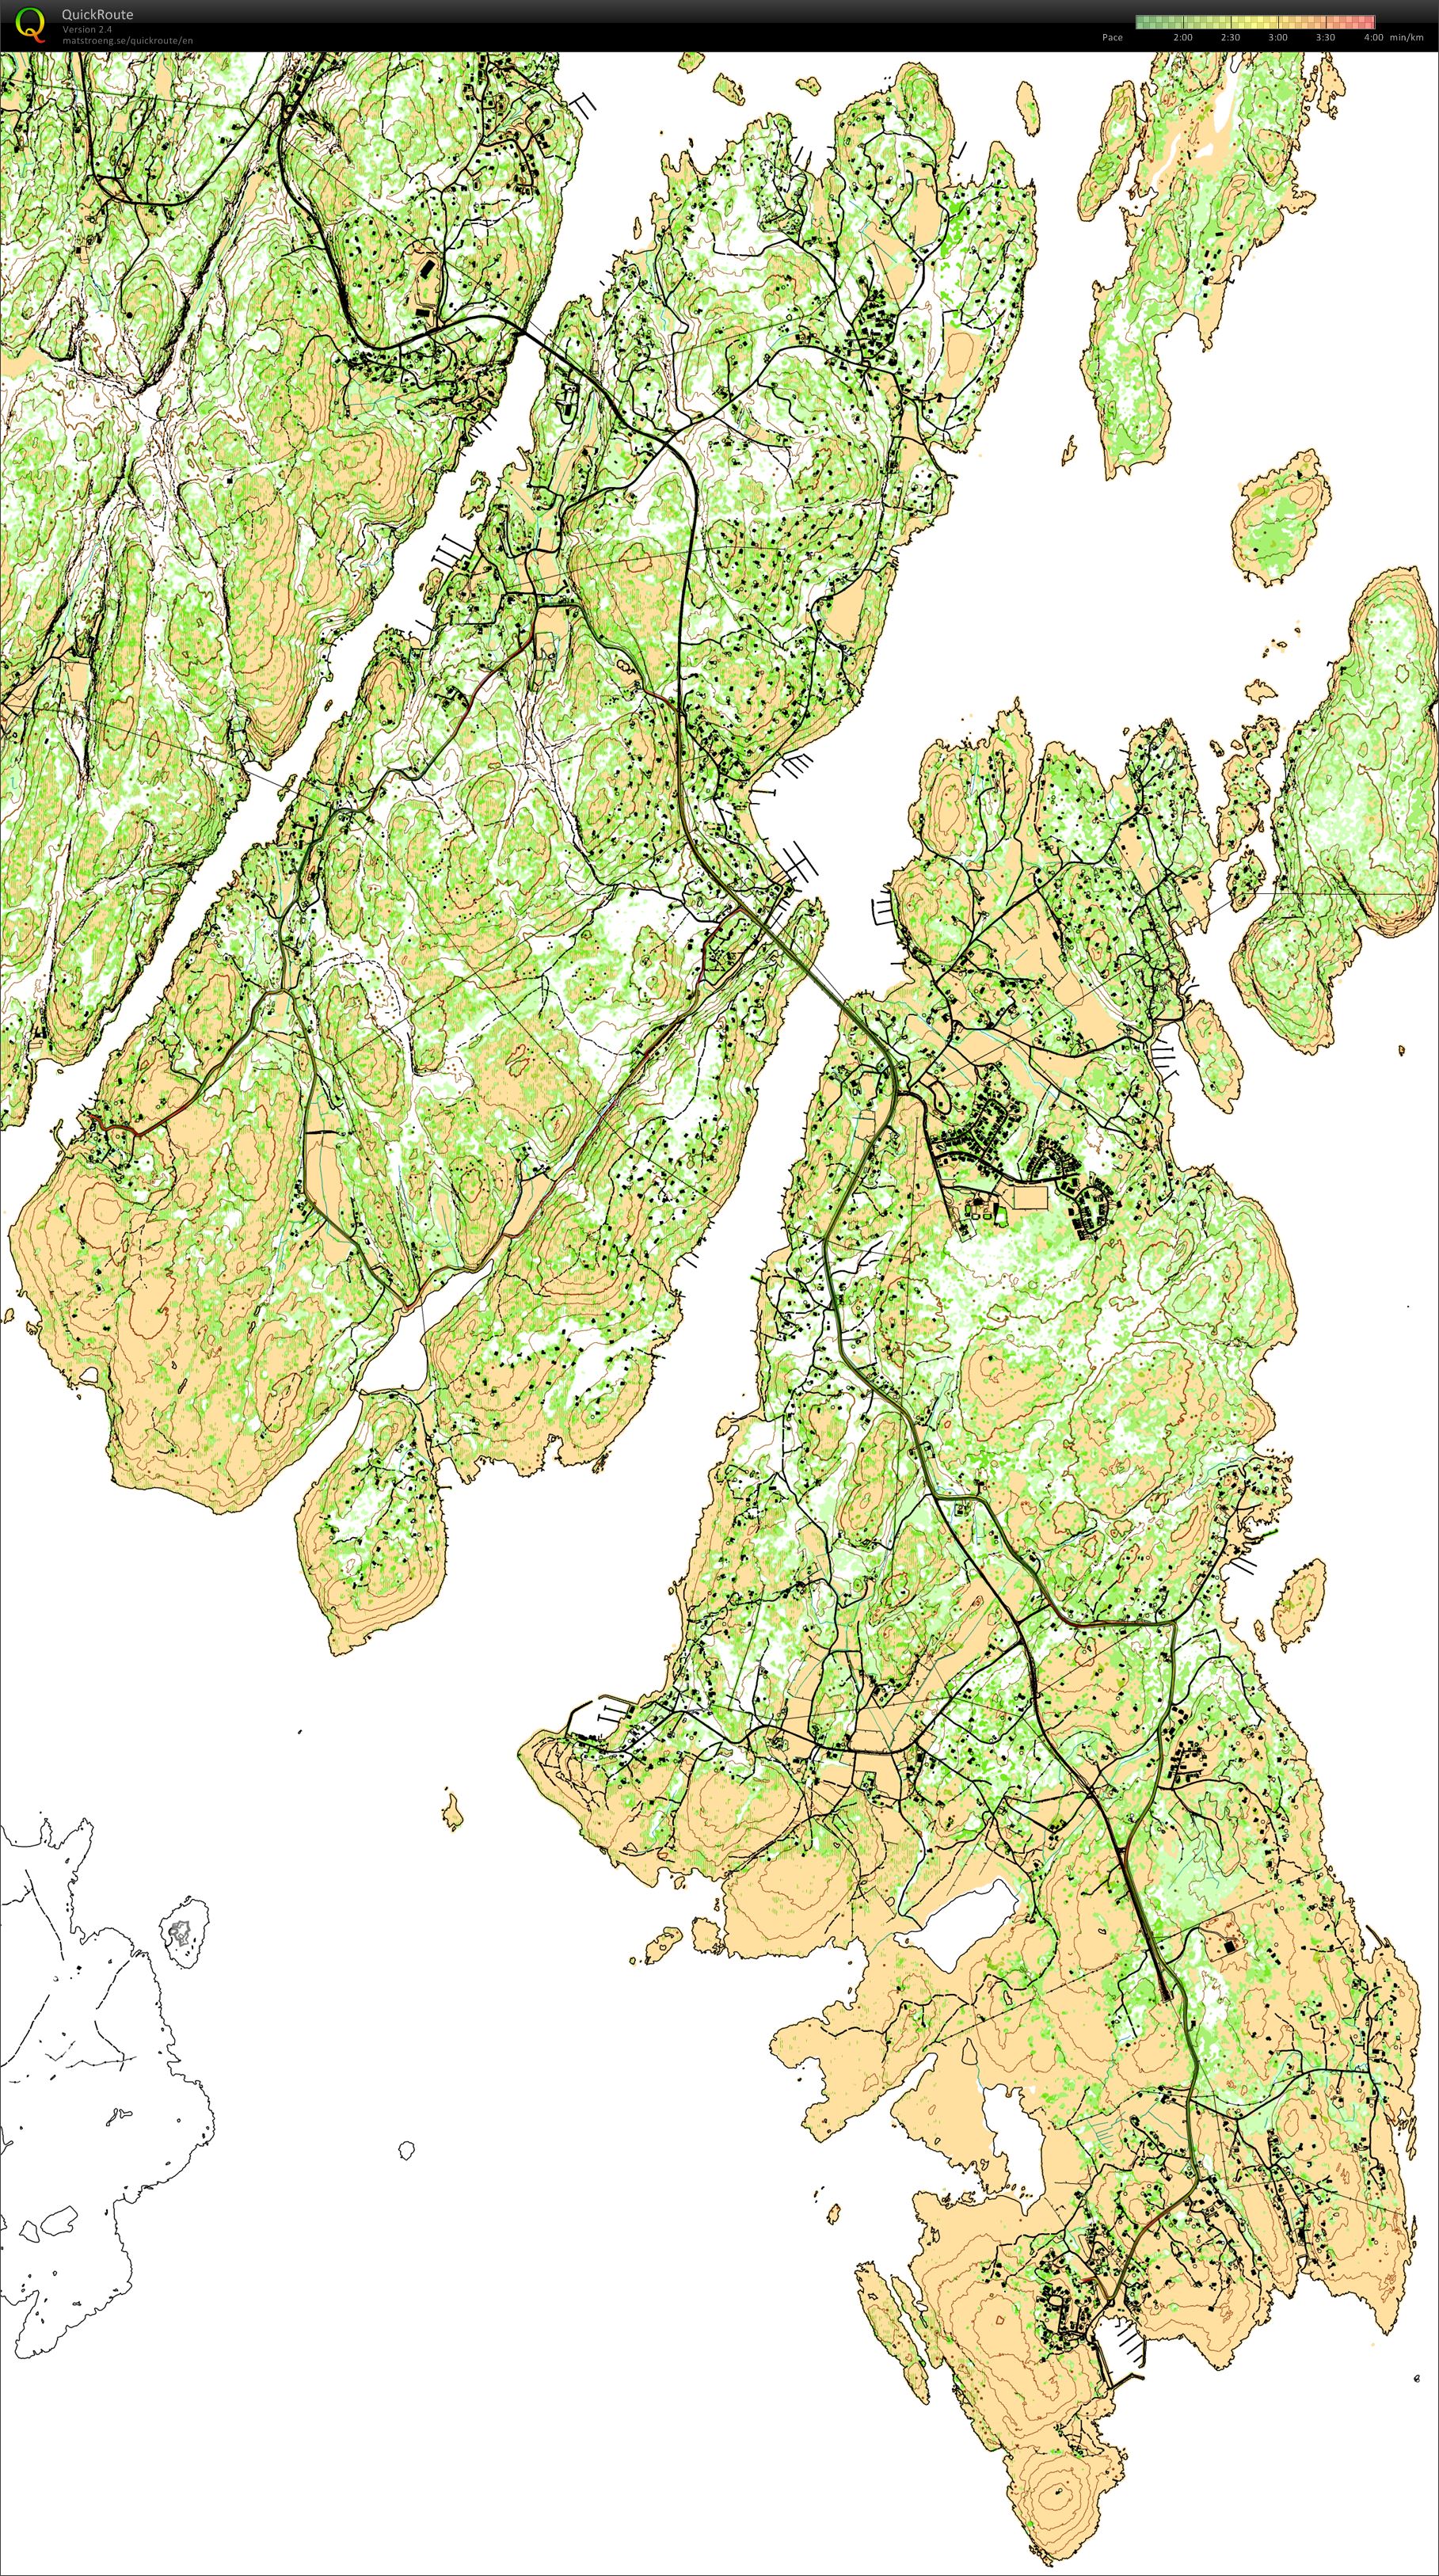 Bike ride on Asmaloy and Spjærøy, using autogenerated map (06-07-2014)